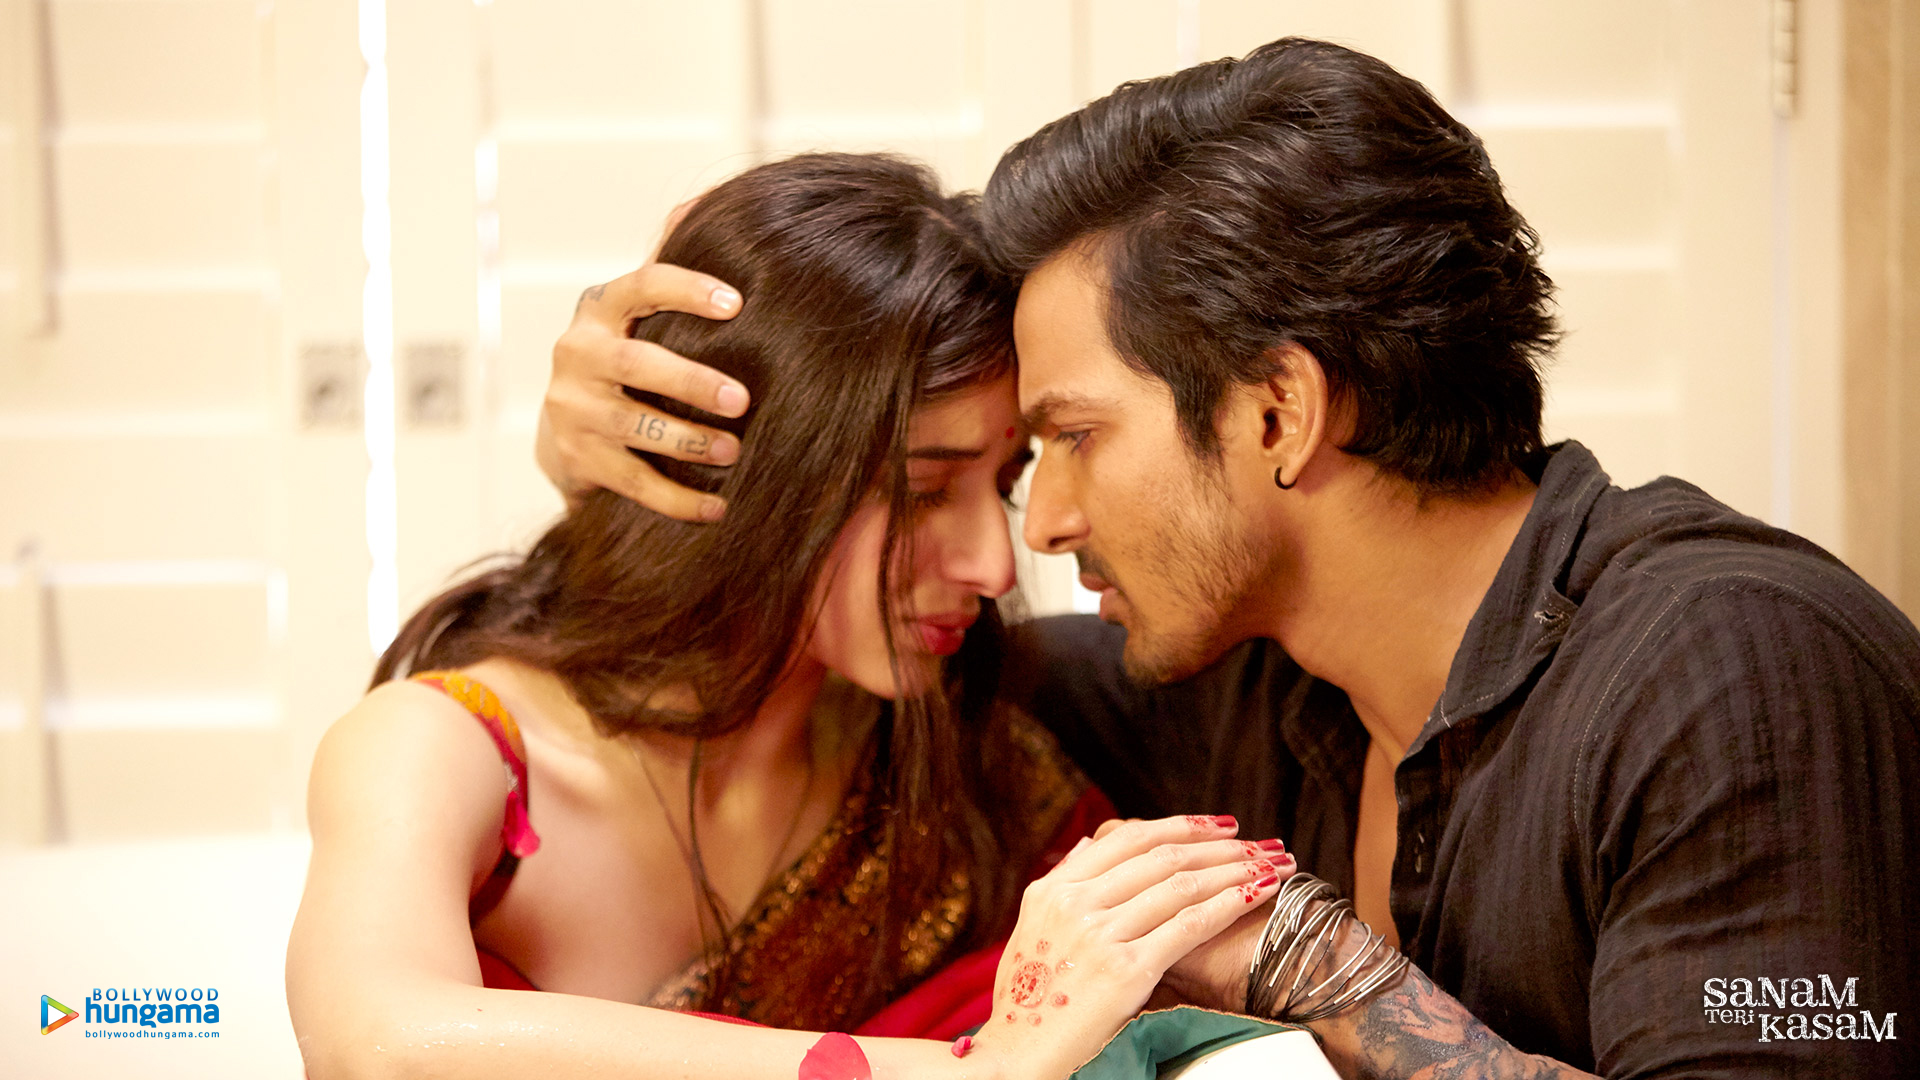 Sanam Teri Kasam A Must See for Those Who Love Emotional Love Stories   Falling in Love with Bollywood